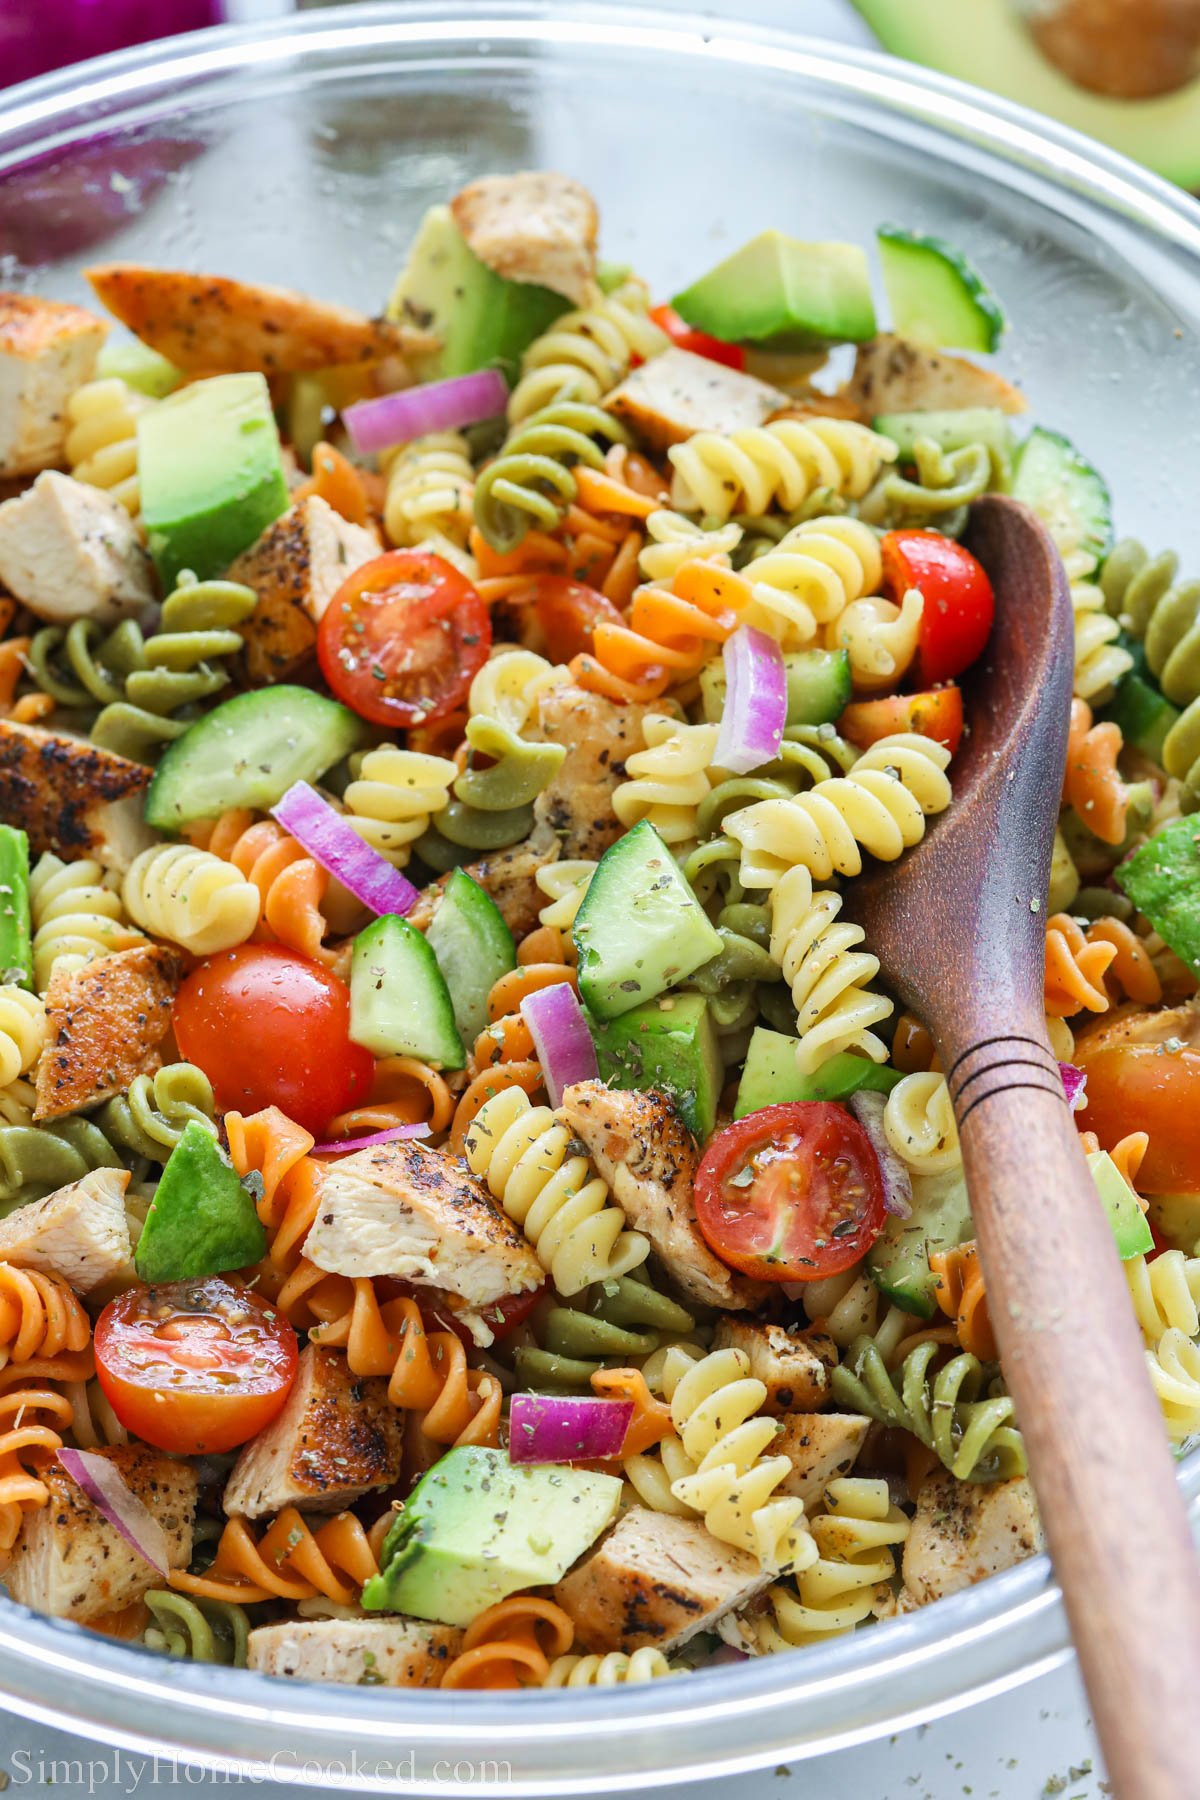 Chicken pasta salad with tomatoes, cucumber, avocado, onion, rotini, and chicken in a bowl with a wooden spoon.